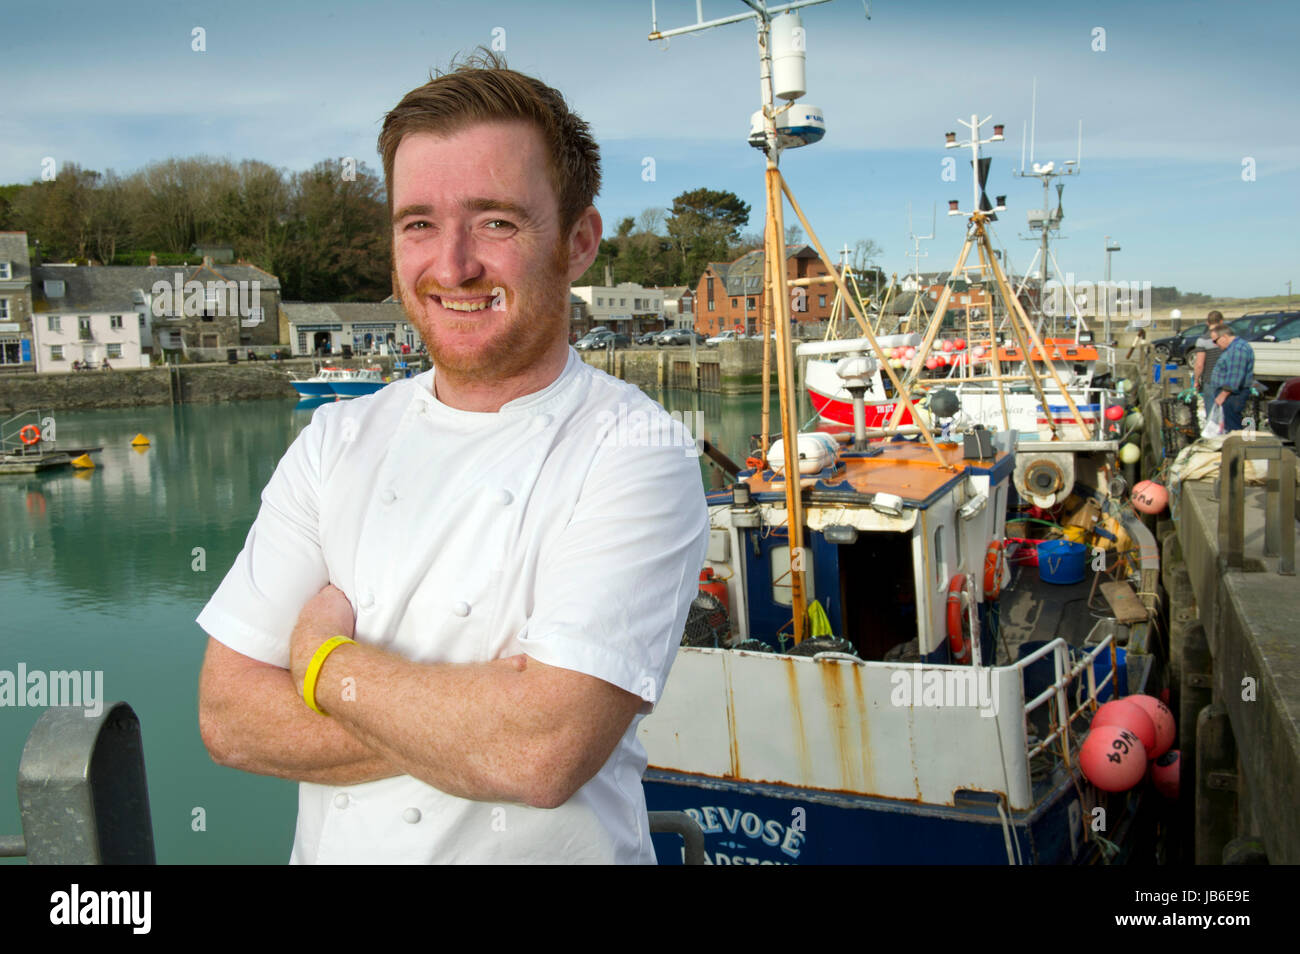 Chef Jack Stein, son of Rick Stein and who now runs the Seafood Restaurant in Padstow, Cornwall, UK, Jack is also photographed in Padstow harbour. Stock Photo